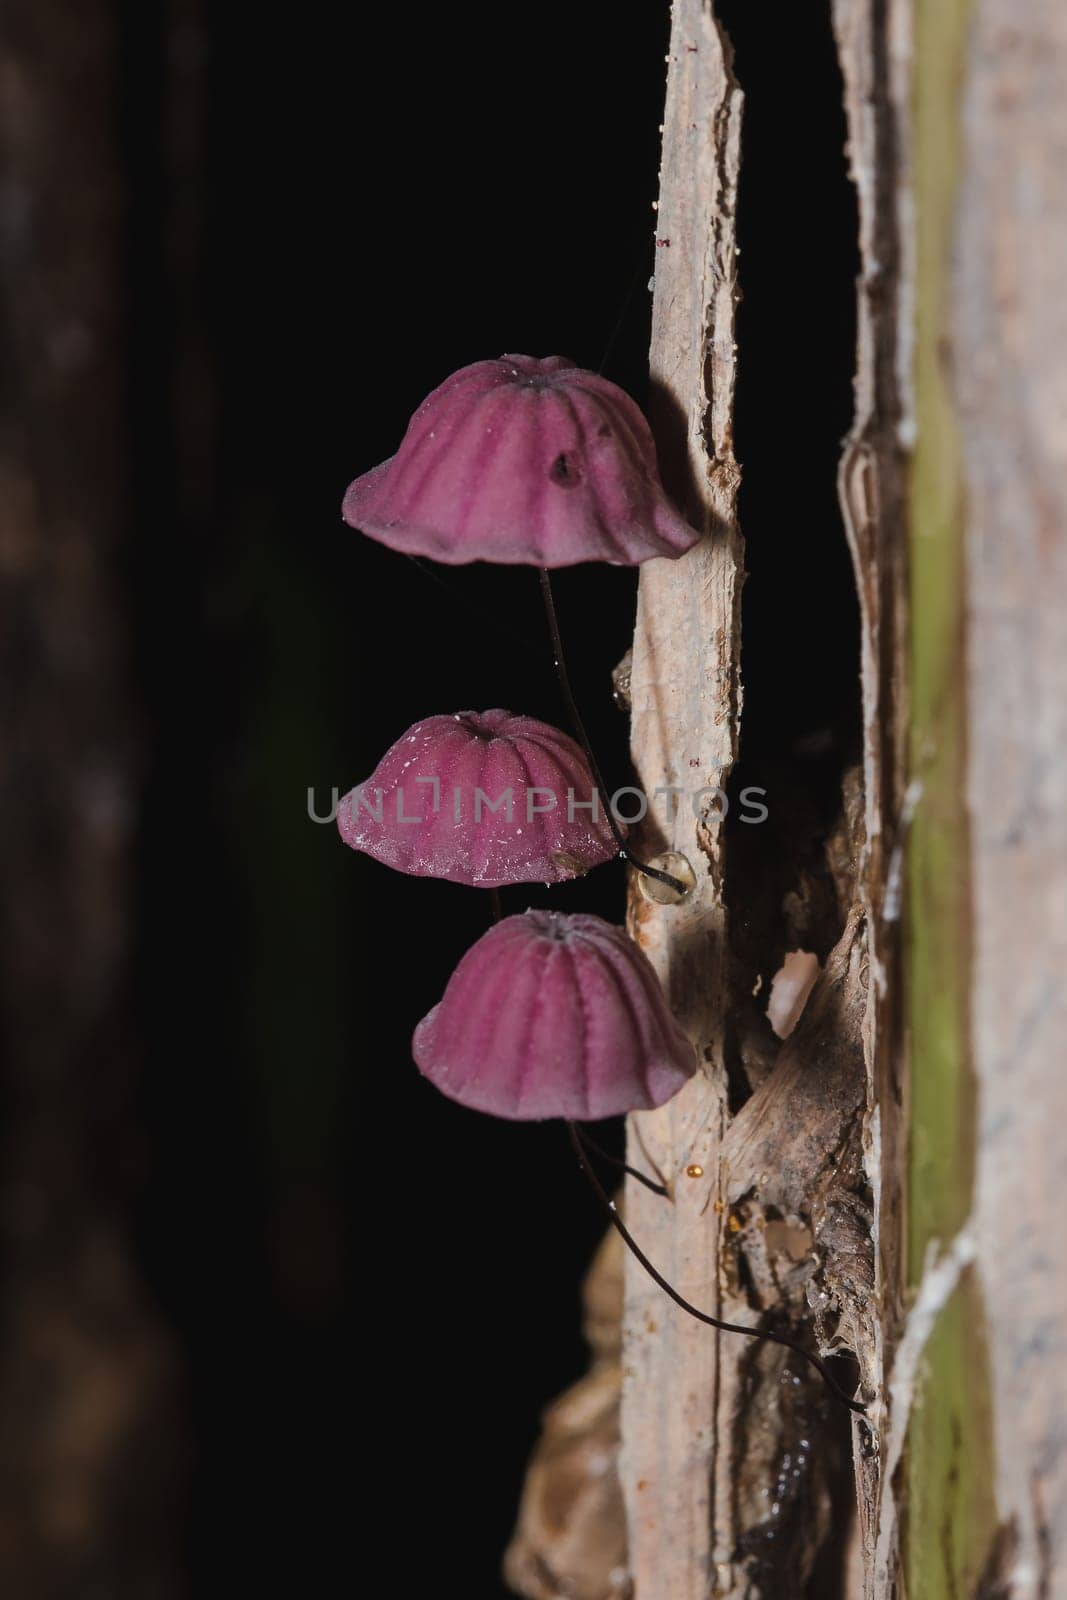 Tiny purple mushrooms in the forest are on the trunk of the trunk.